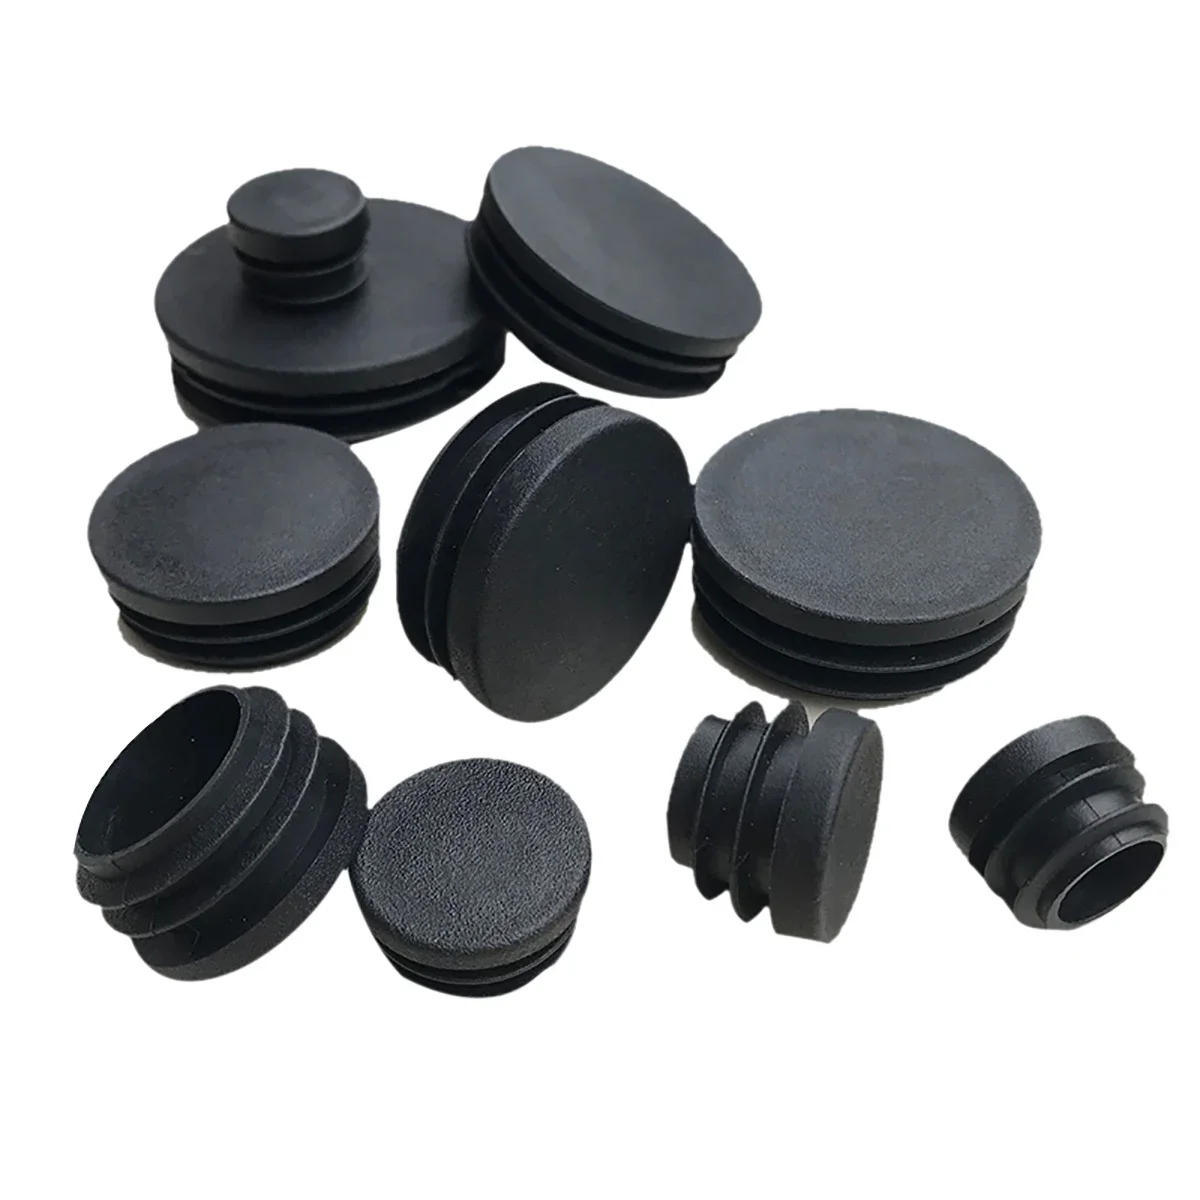 16mm 19mm 22mm 25mm Chair Table Feet Cap Thicken Round Plastic Blanking End Cap Tube Pipe Insert Plug Decorative Dust Cover